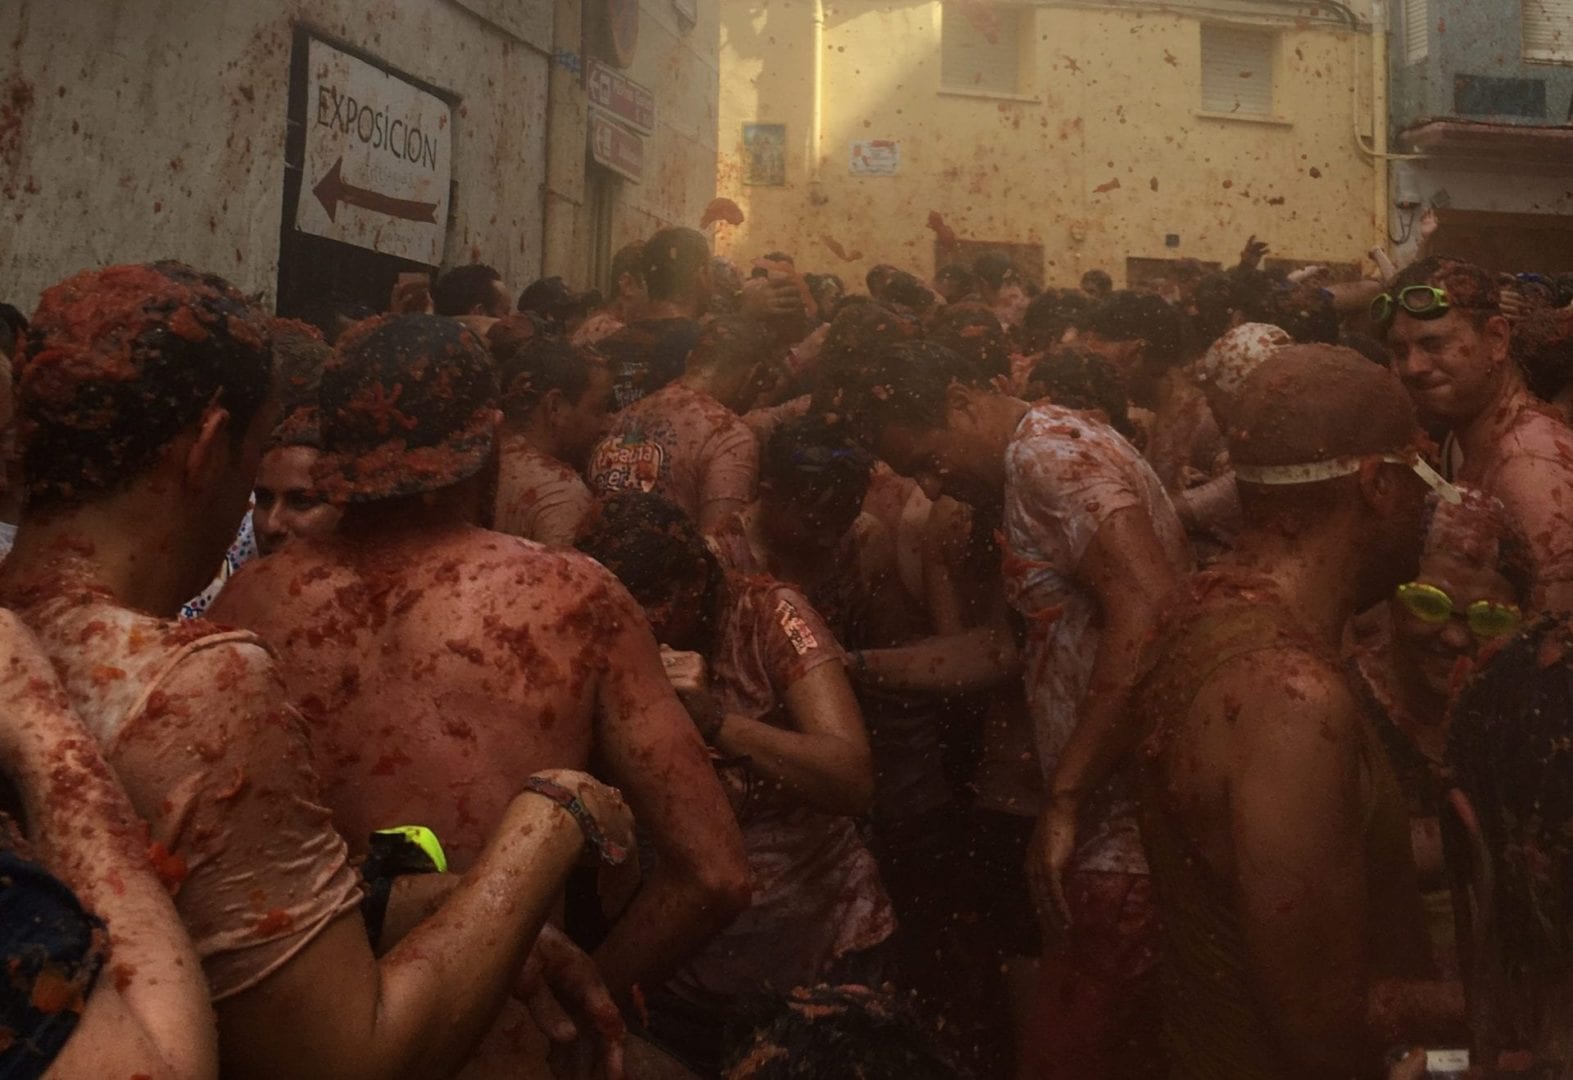 La Tomatina in 24 hours